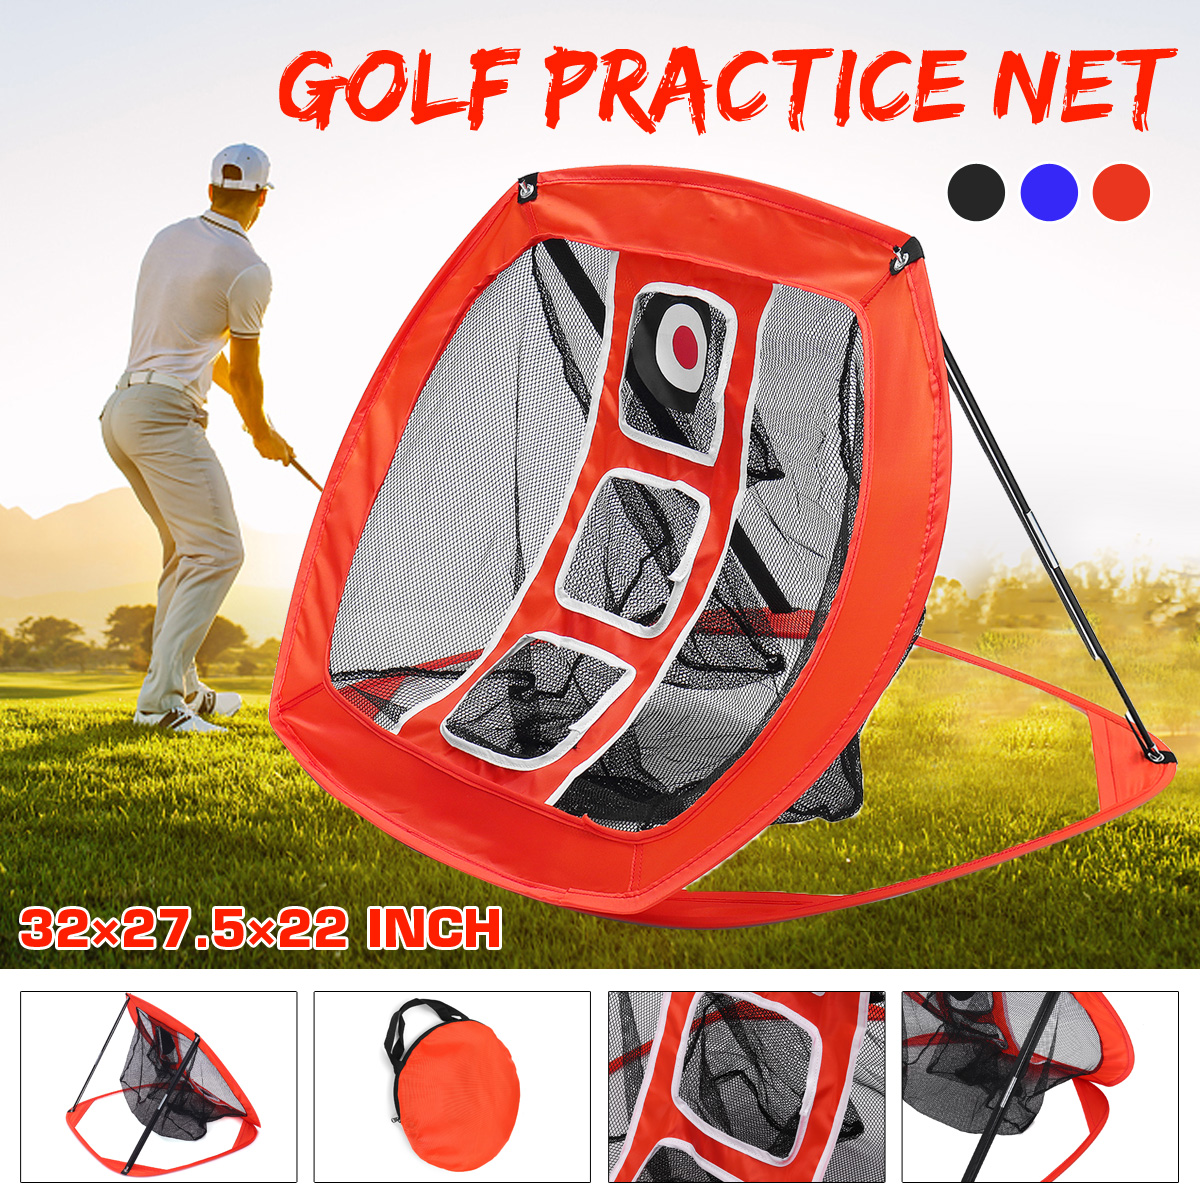 Foldable-Golf-Chipping-Net-Backyard-Driving-Aid-Indoor-Outdoor-Hitting-Practice-Garden-Living-Room-B-1688178-1